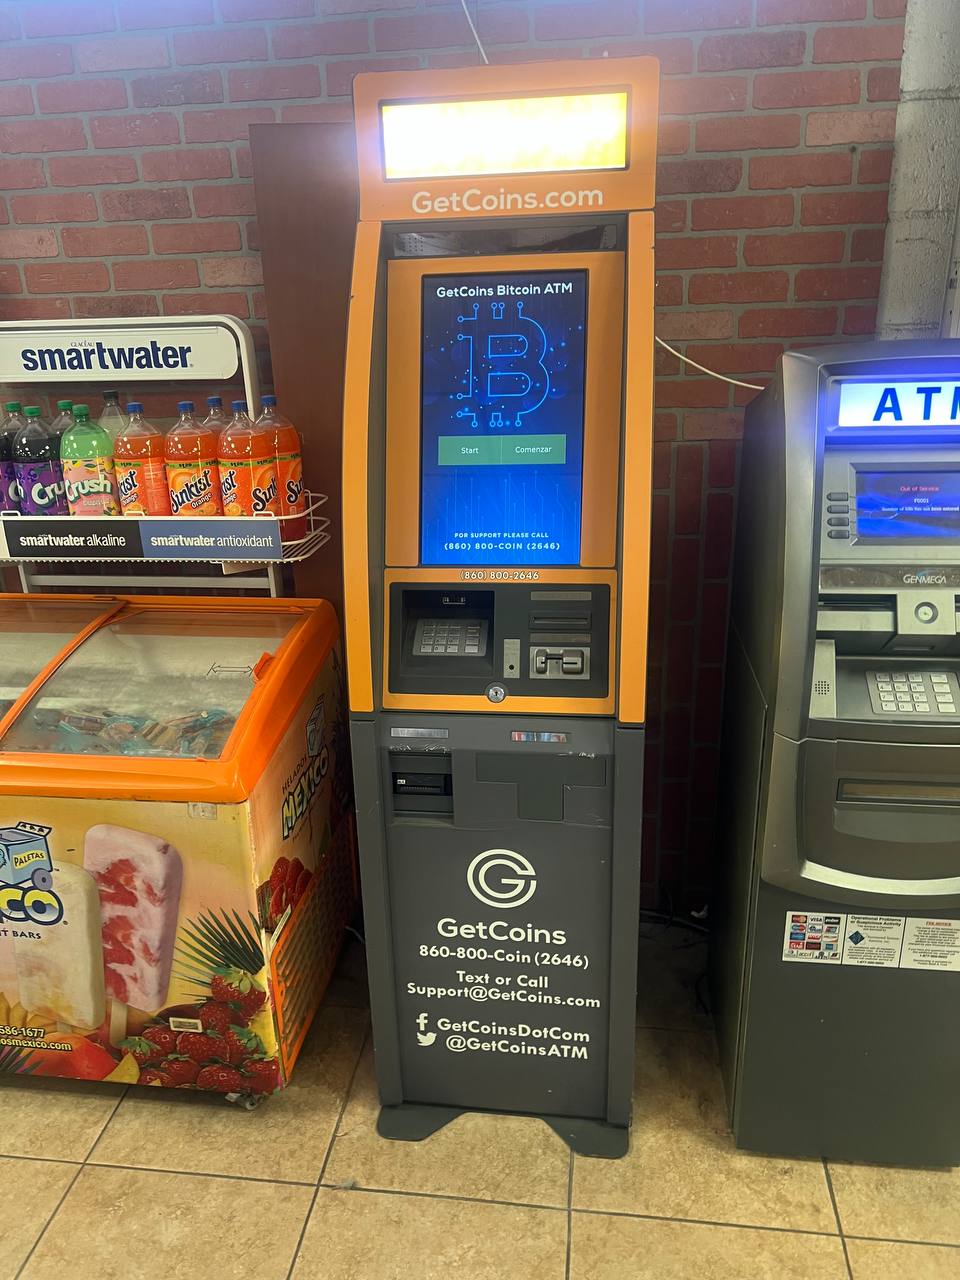 Getcoins - Bitcoin ATM - Inside of Lucky 7 Food Stores in Bakersfield, California